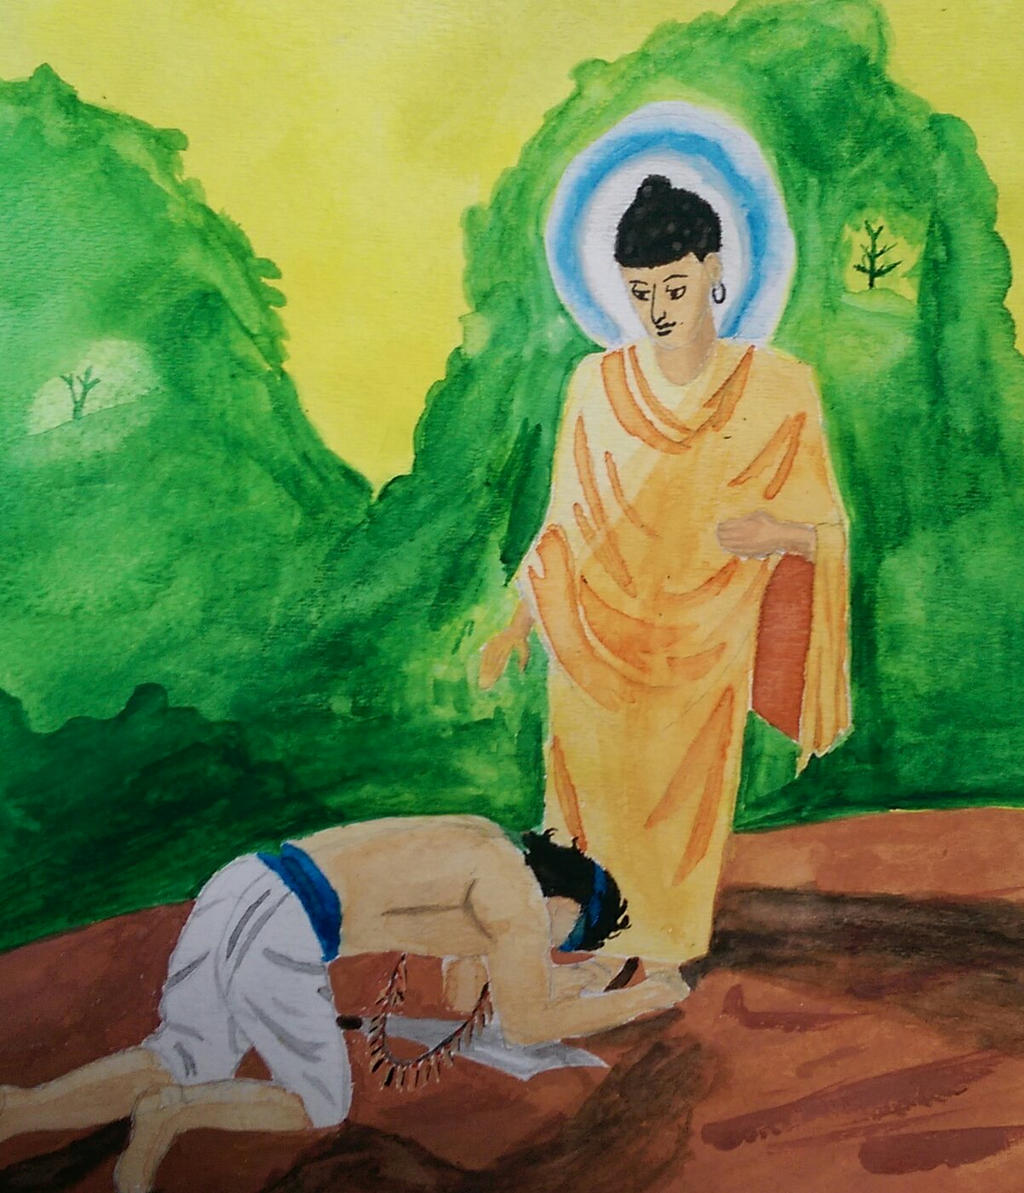 Angulimala at the feet of Buddha by CloudyTuesdays on DeviantArt